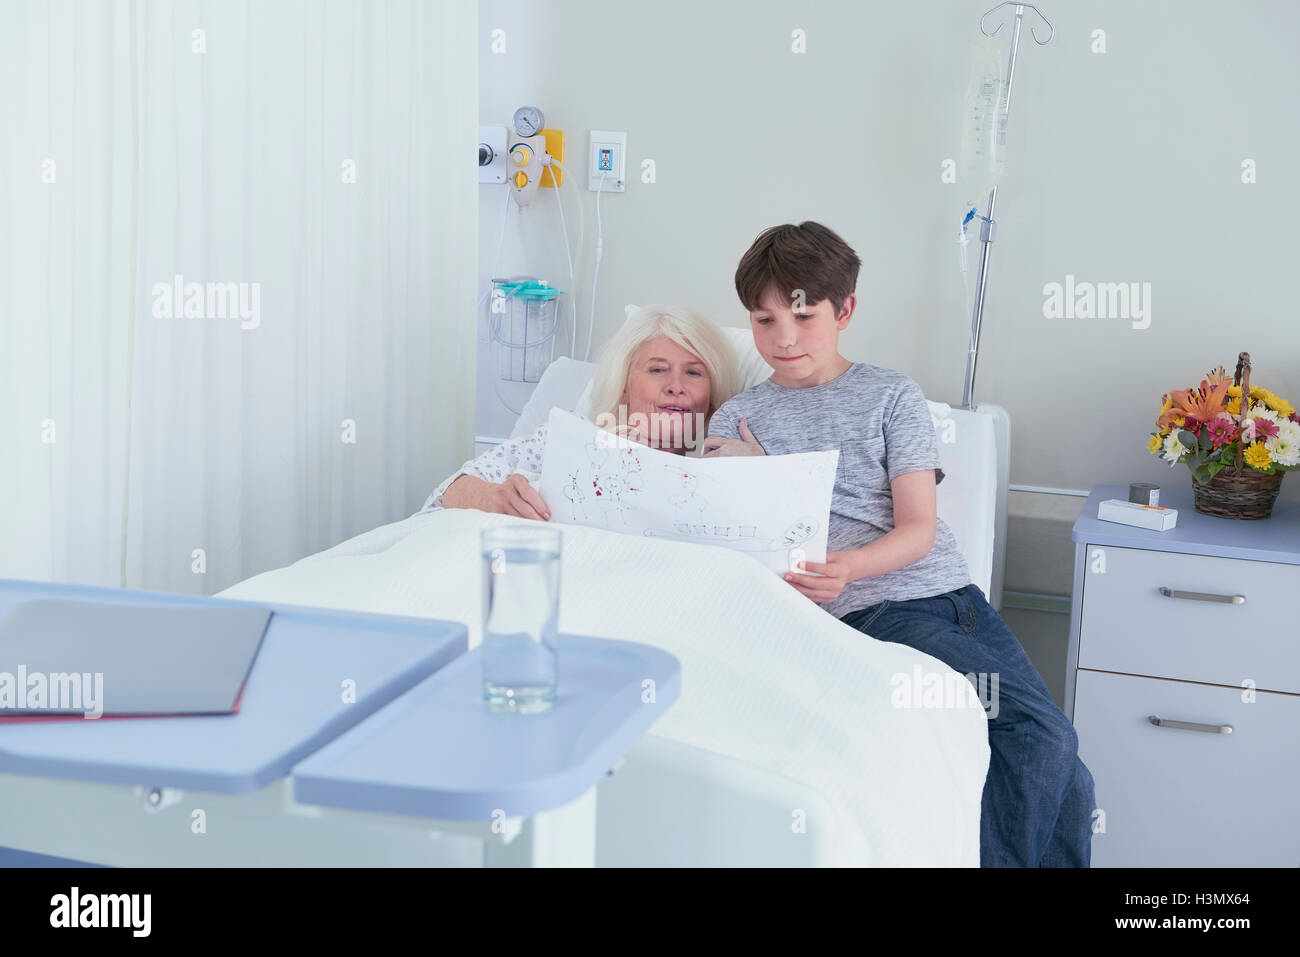 Senior female patient in hospital bed looking at grandson's drawing Stock Photo